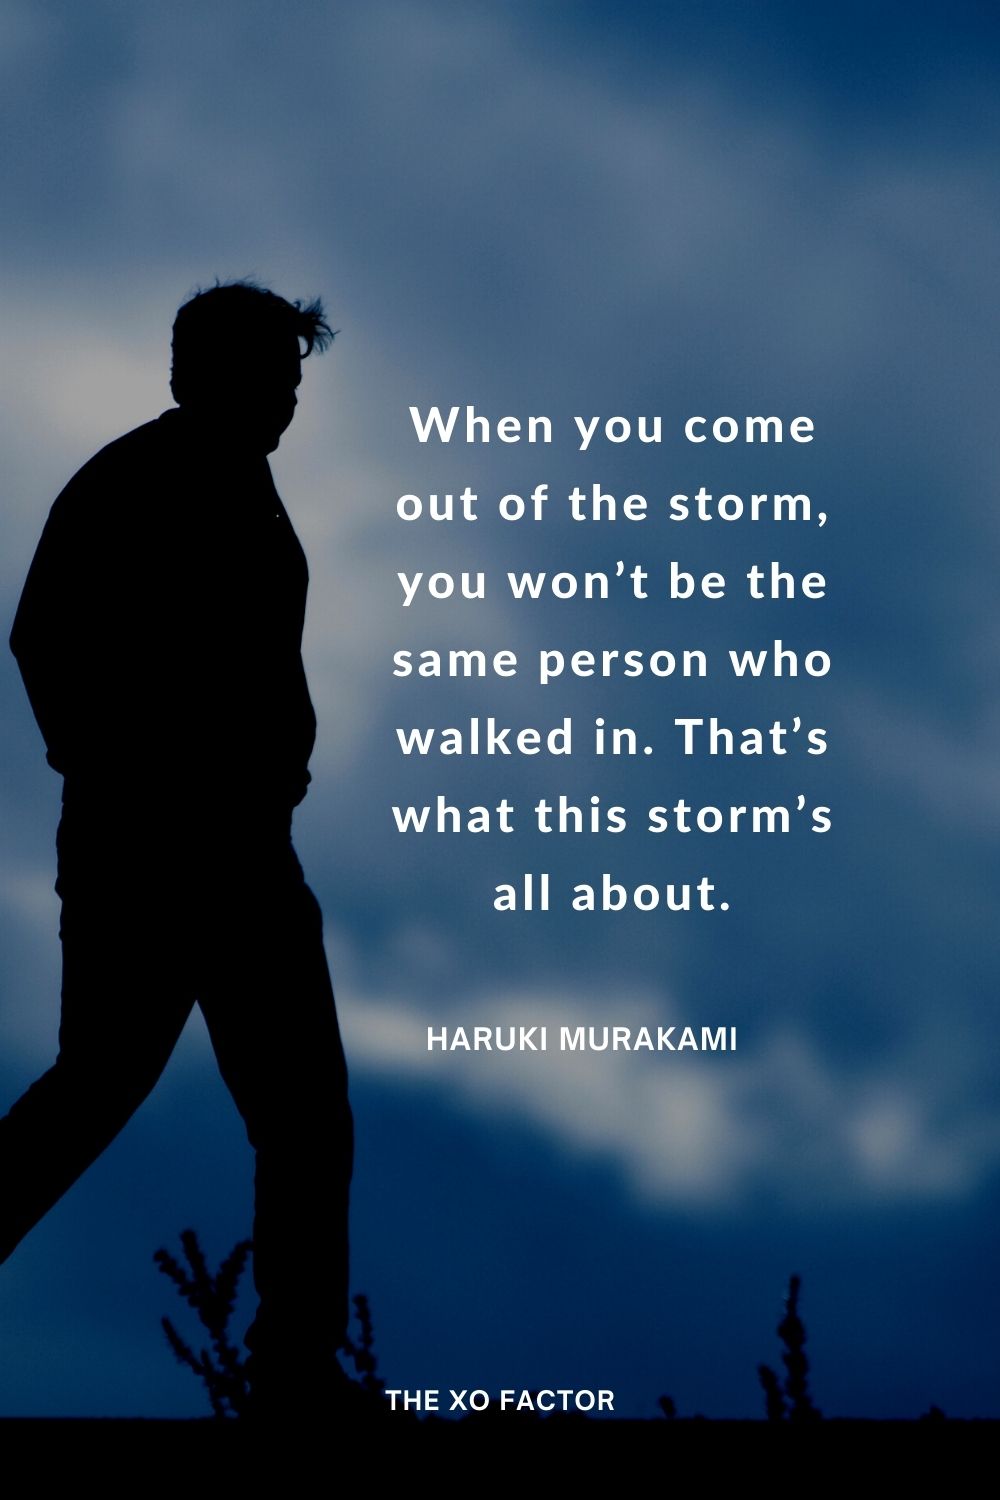 When you come out of the storm, you won’t be the same person who walked in. That’s what this storm’s all about.